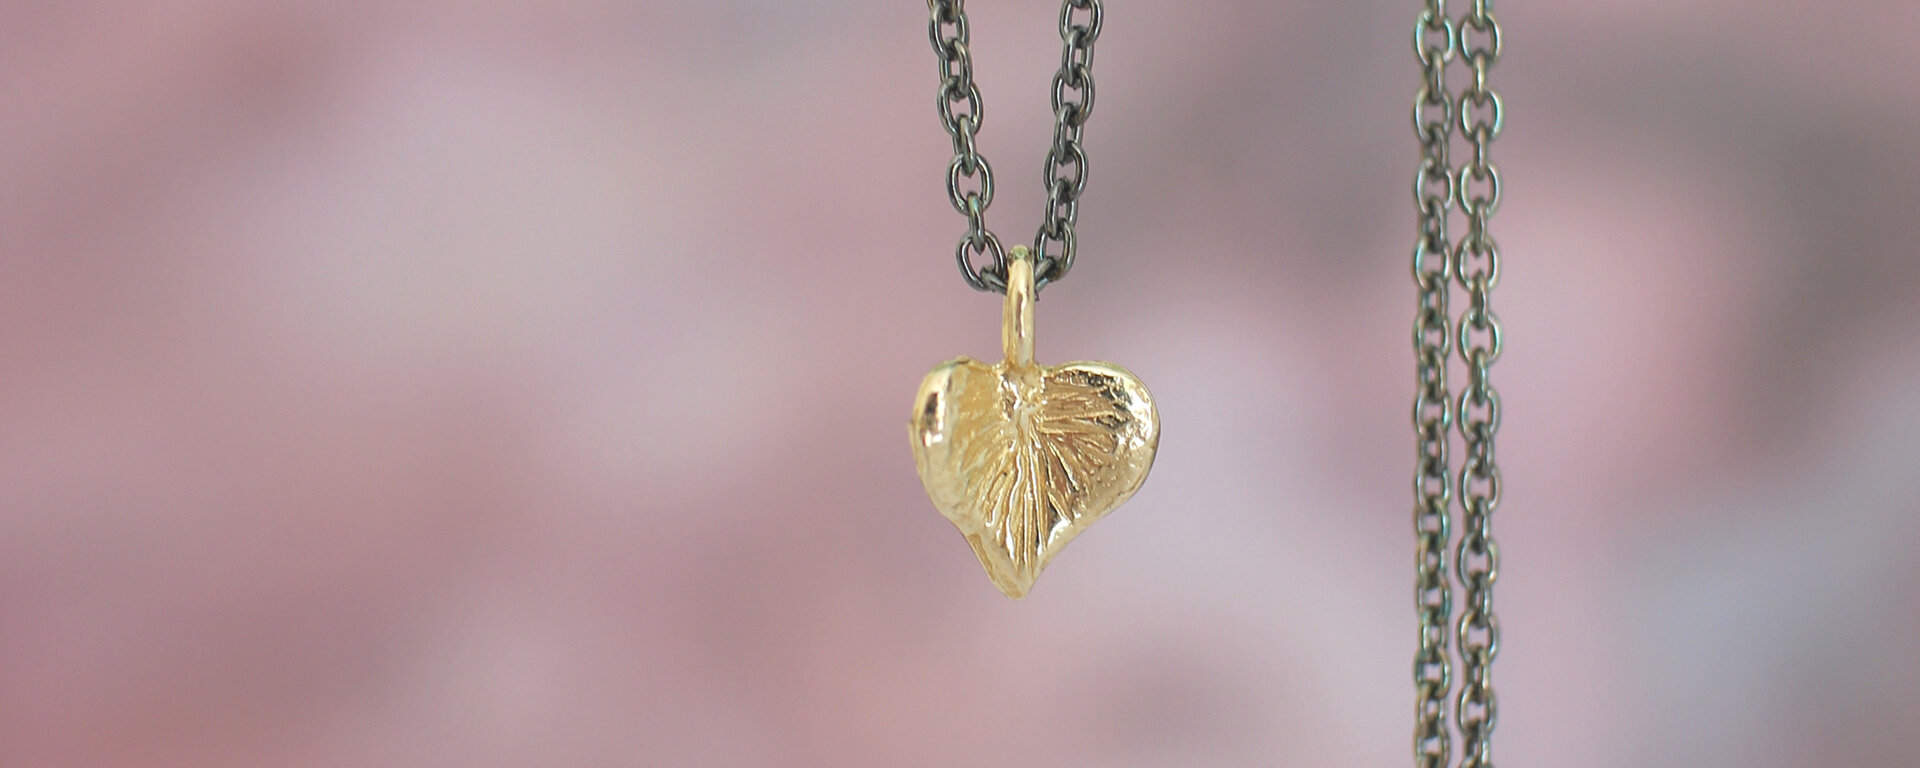 solid gold hearts flowers leaves kowhai kauri flutter lilygriffin nz jeweller